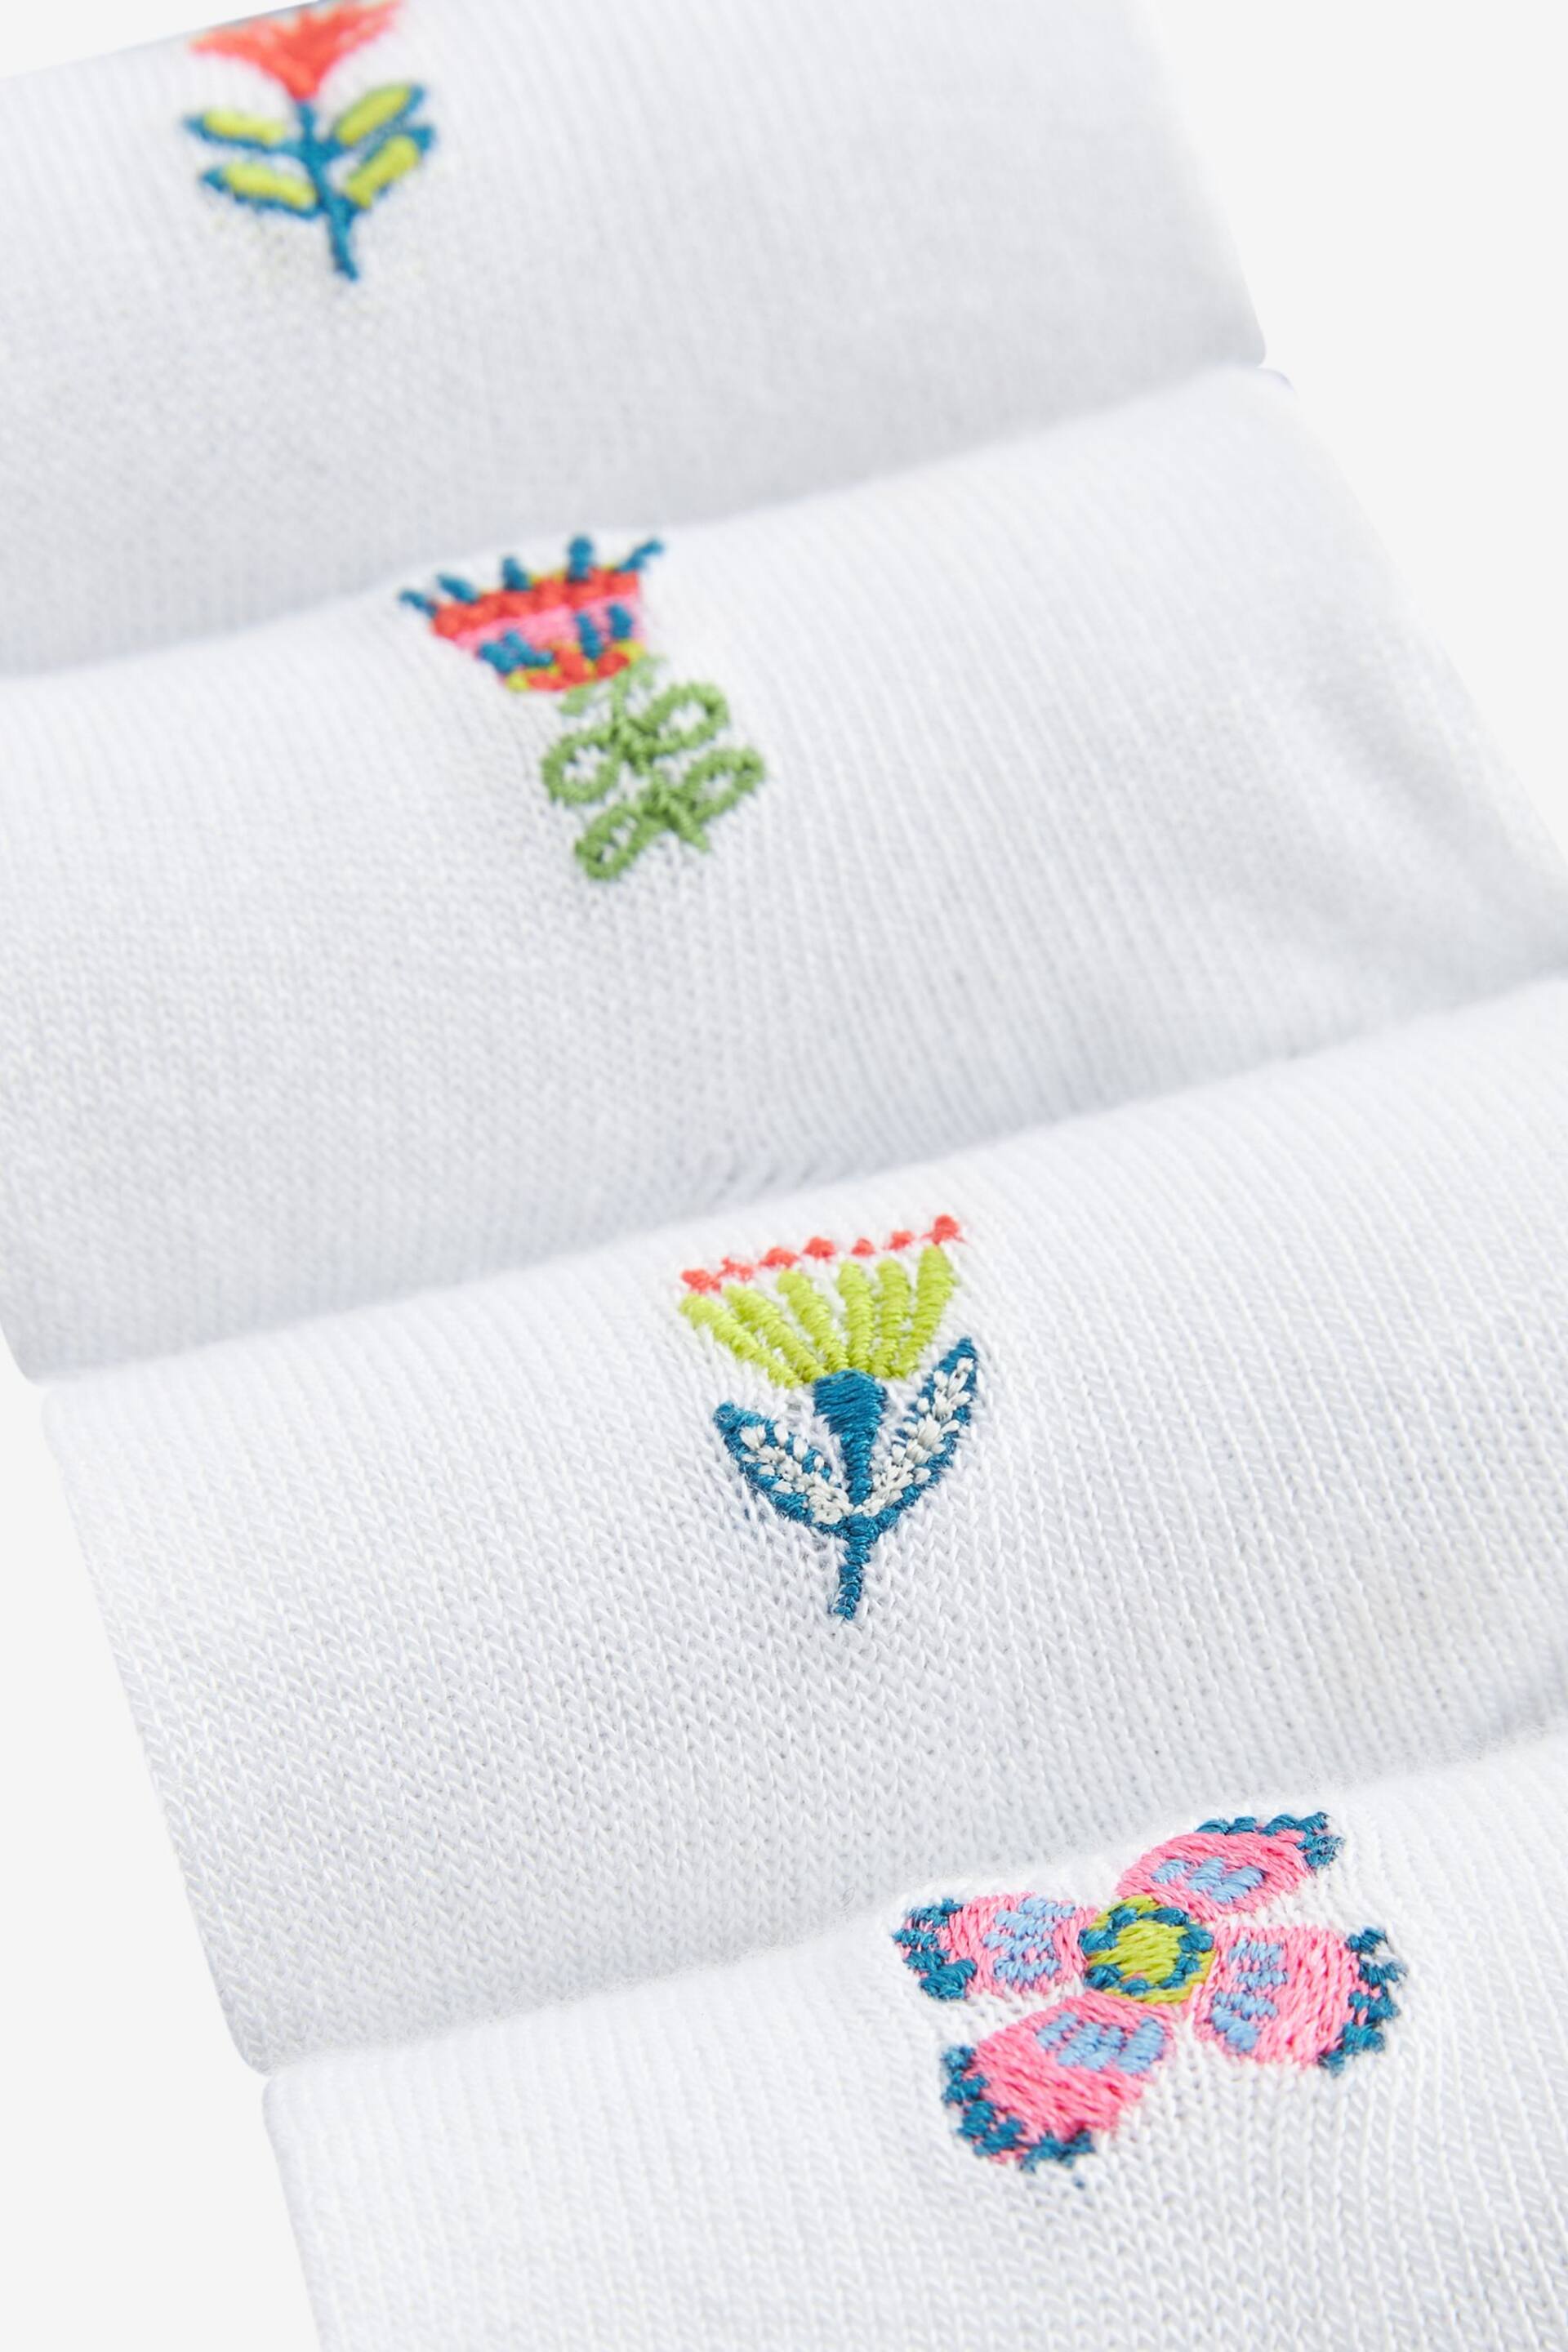 Flower Embroidered Motif White Trainers Socks 4 Pack - Image 2 of 2